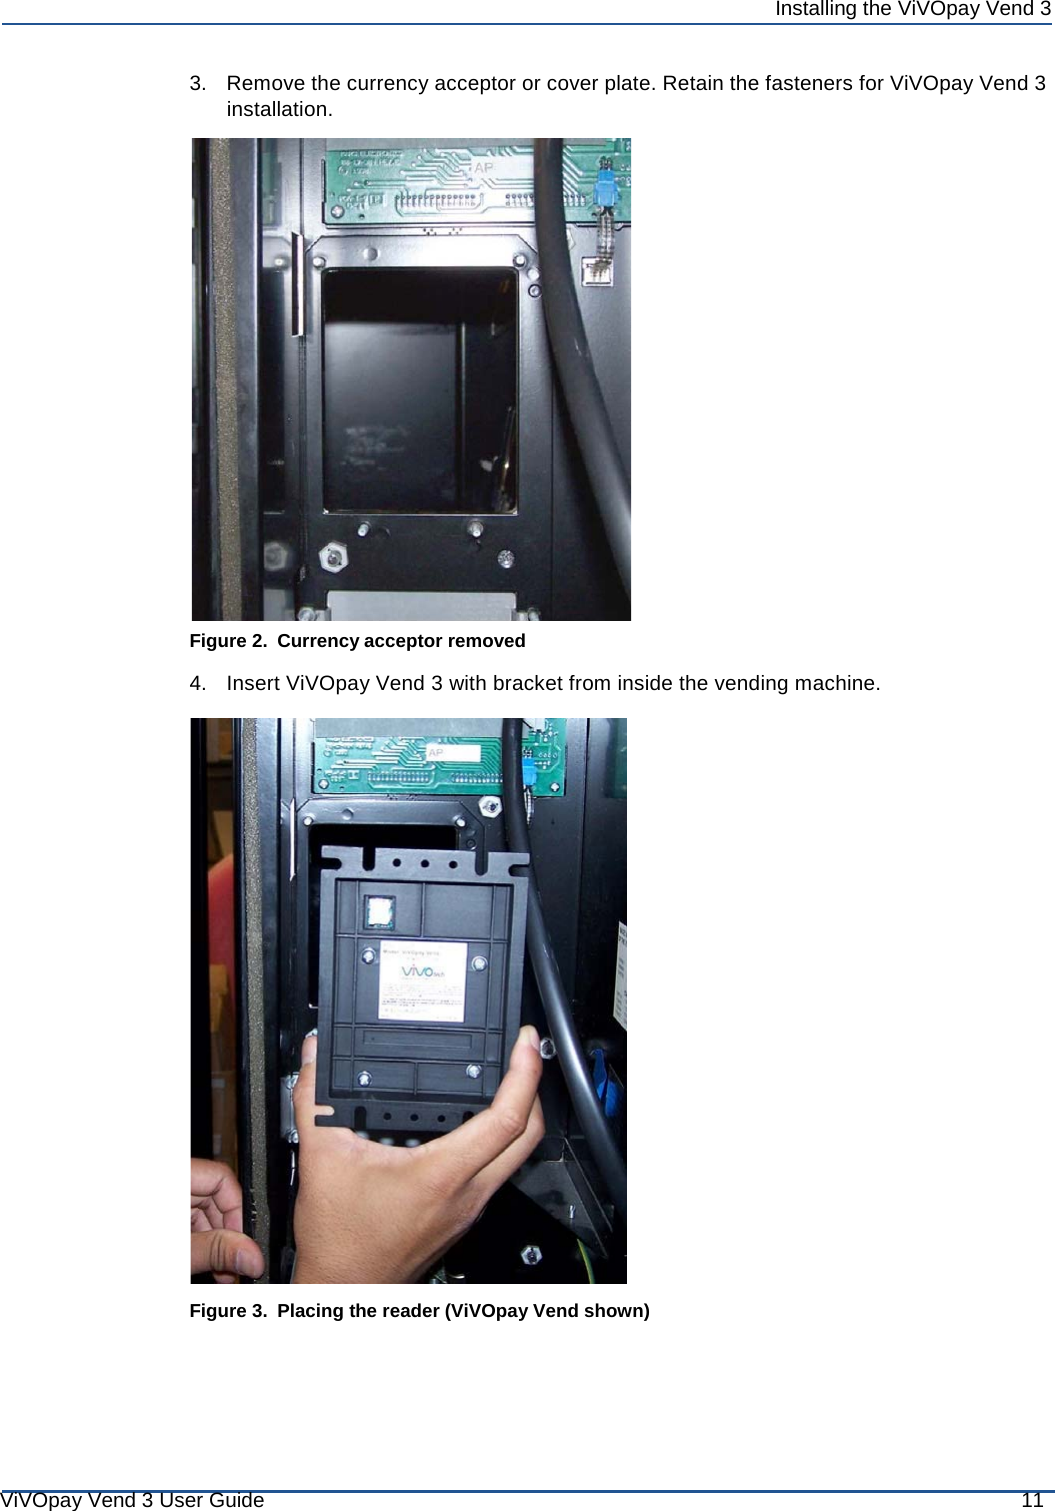 ViVOpay Vend 3 User Guide 11 Installing the ViVOpay Vend 3        3.   Remove the currency acceptor or cover plate. Retain the fasteners for ViVOpay Vend 3 installation.                         Figure 2. Currency acceptor removed  4.   Insert ViVOpay Vend 3 with bracket from inside the vending machine.    Figure 3. Placing the reader (ViVOpay Vend shown) 